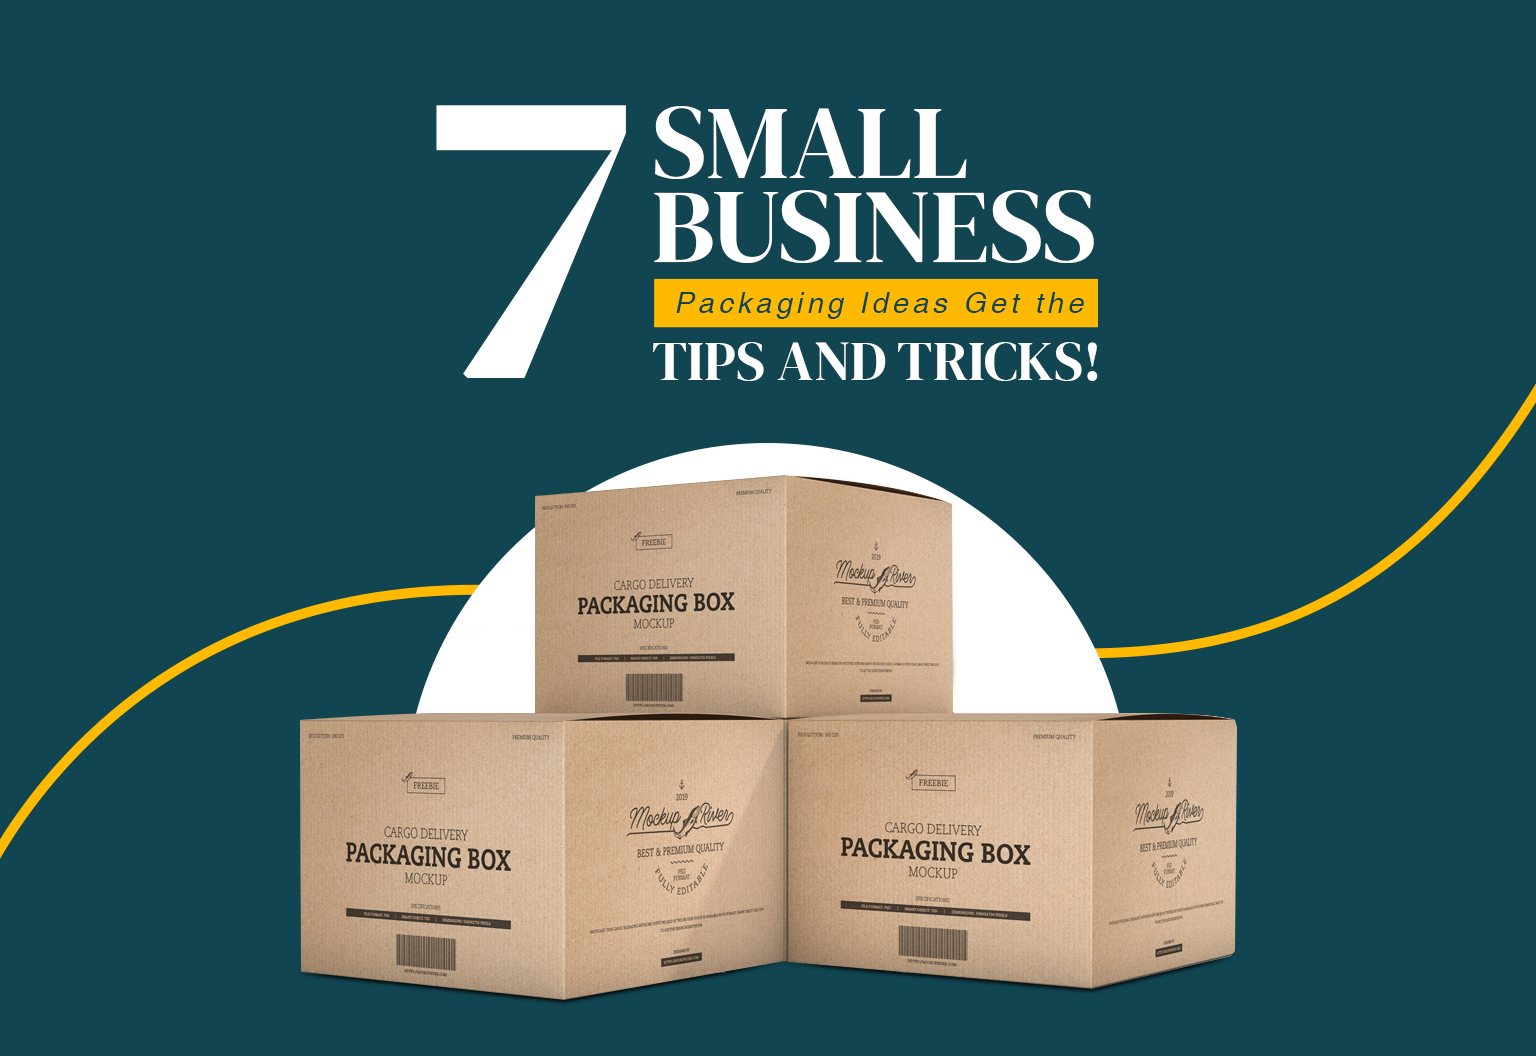 7-Small-Business-Packaging-Ideas-Get-the-Tips-and-Tricks!